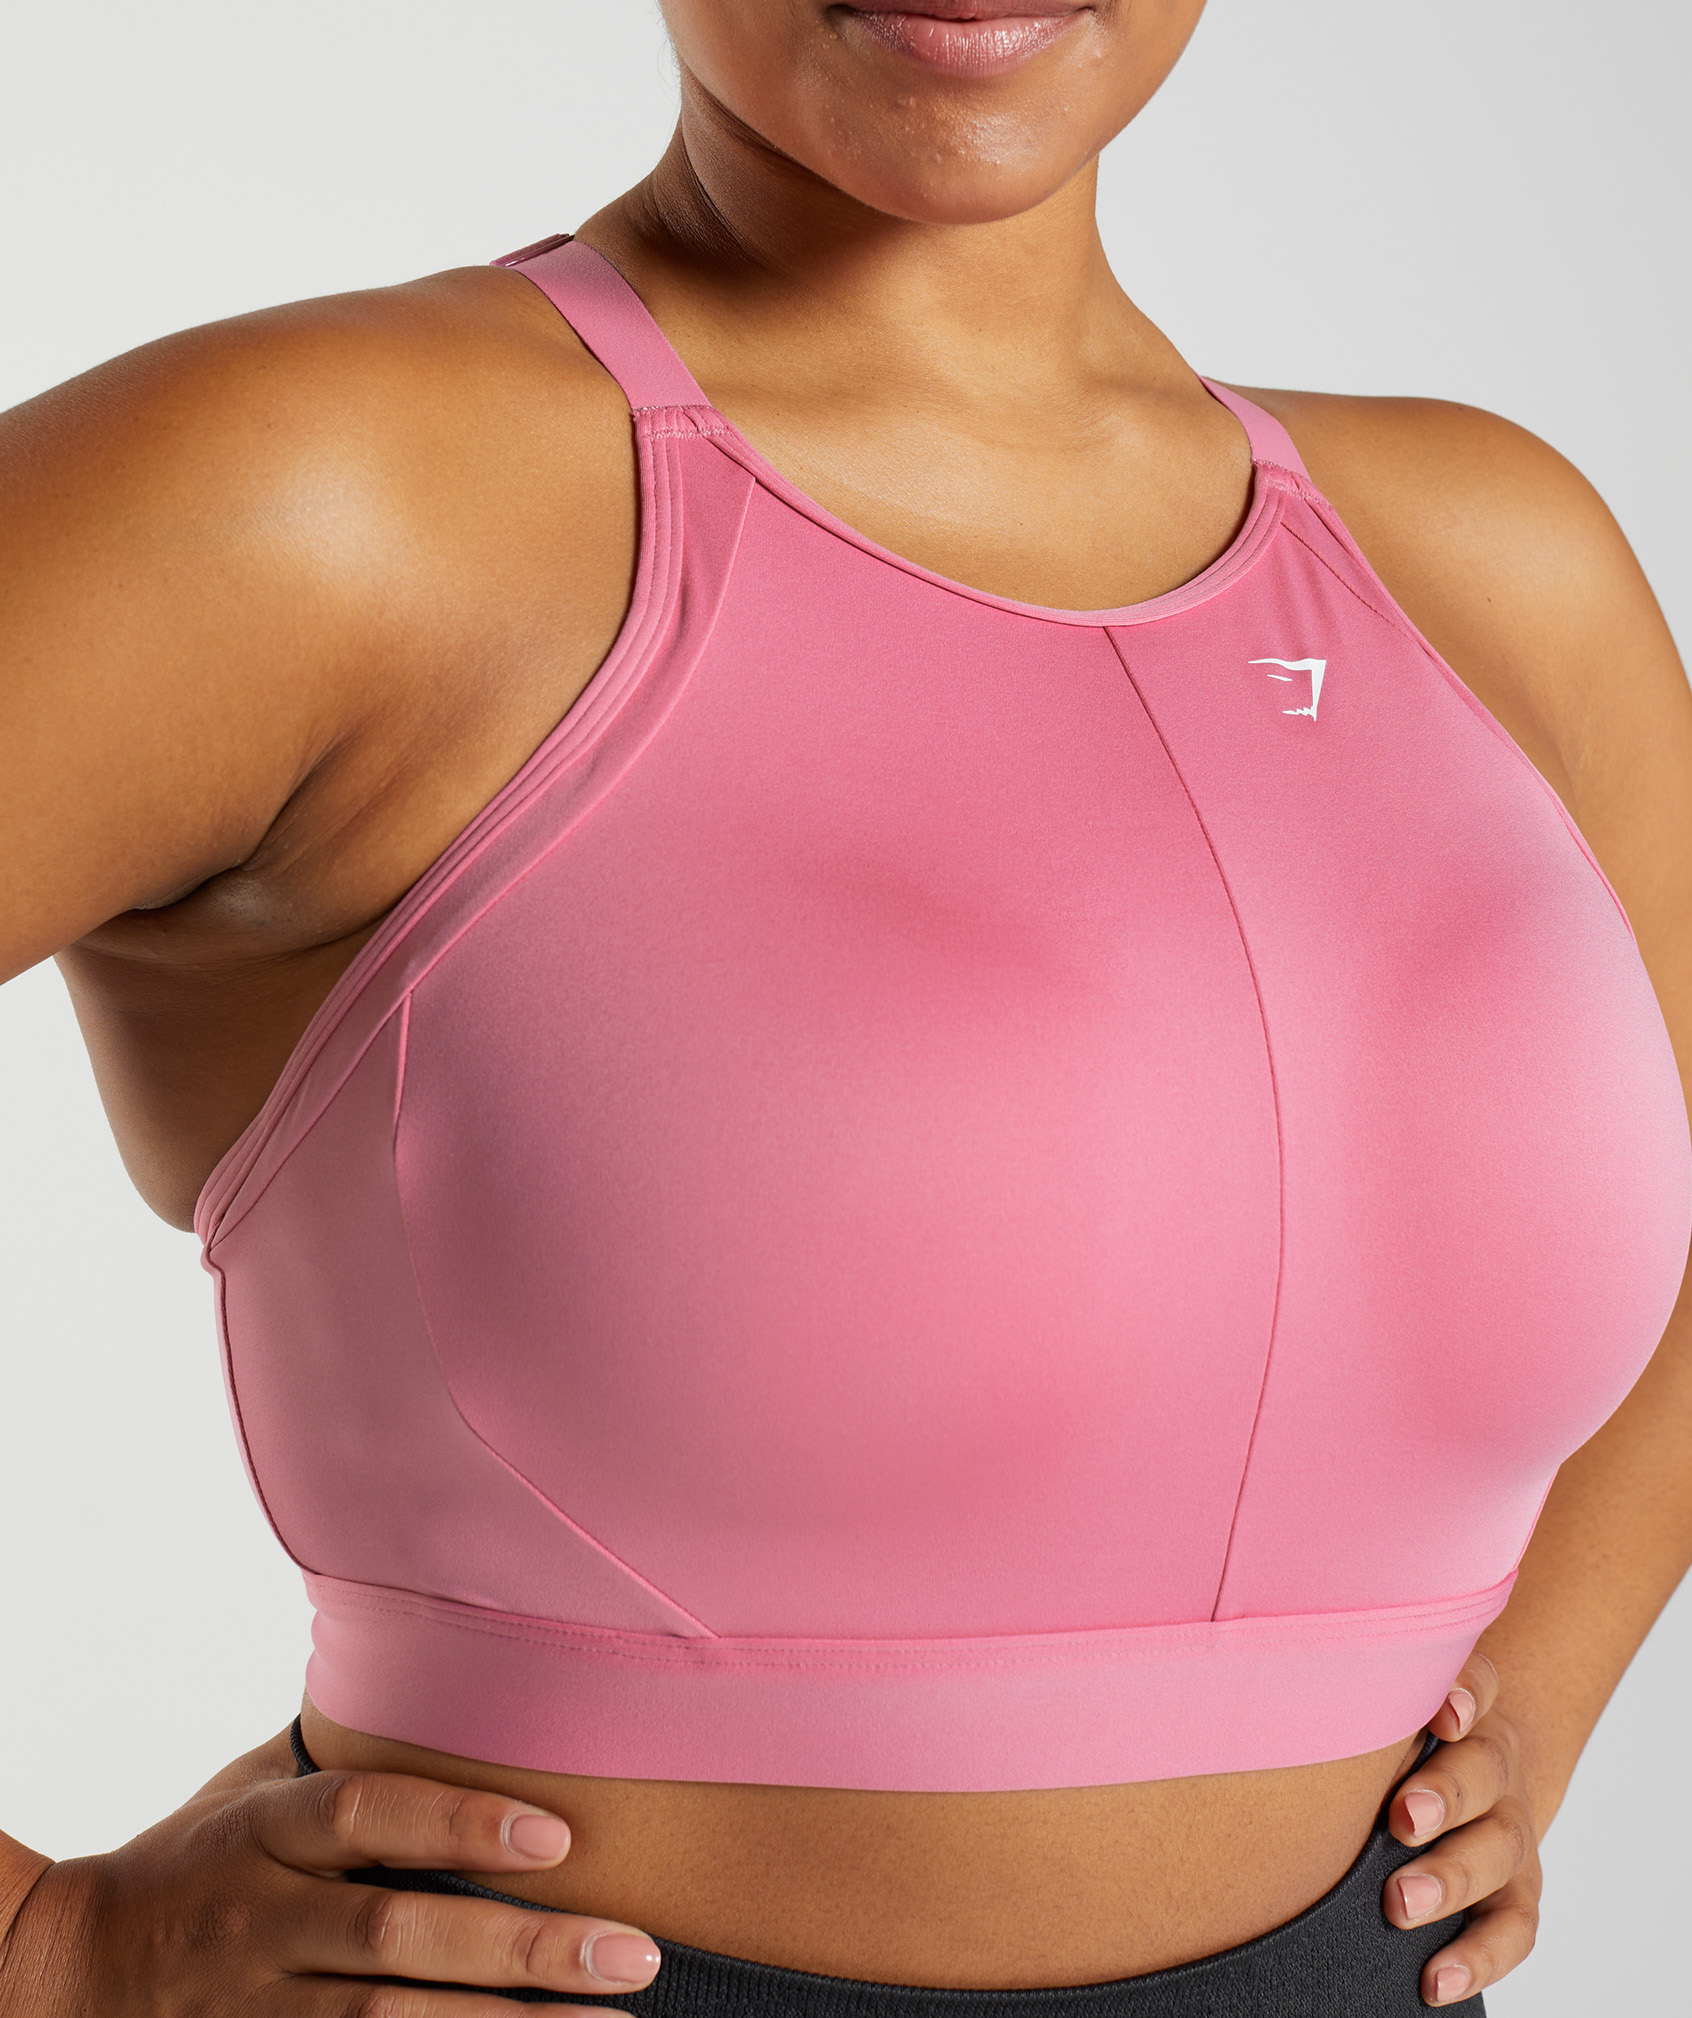 How to Find the Right Style of Sports Bra